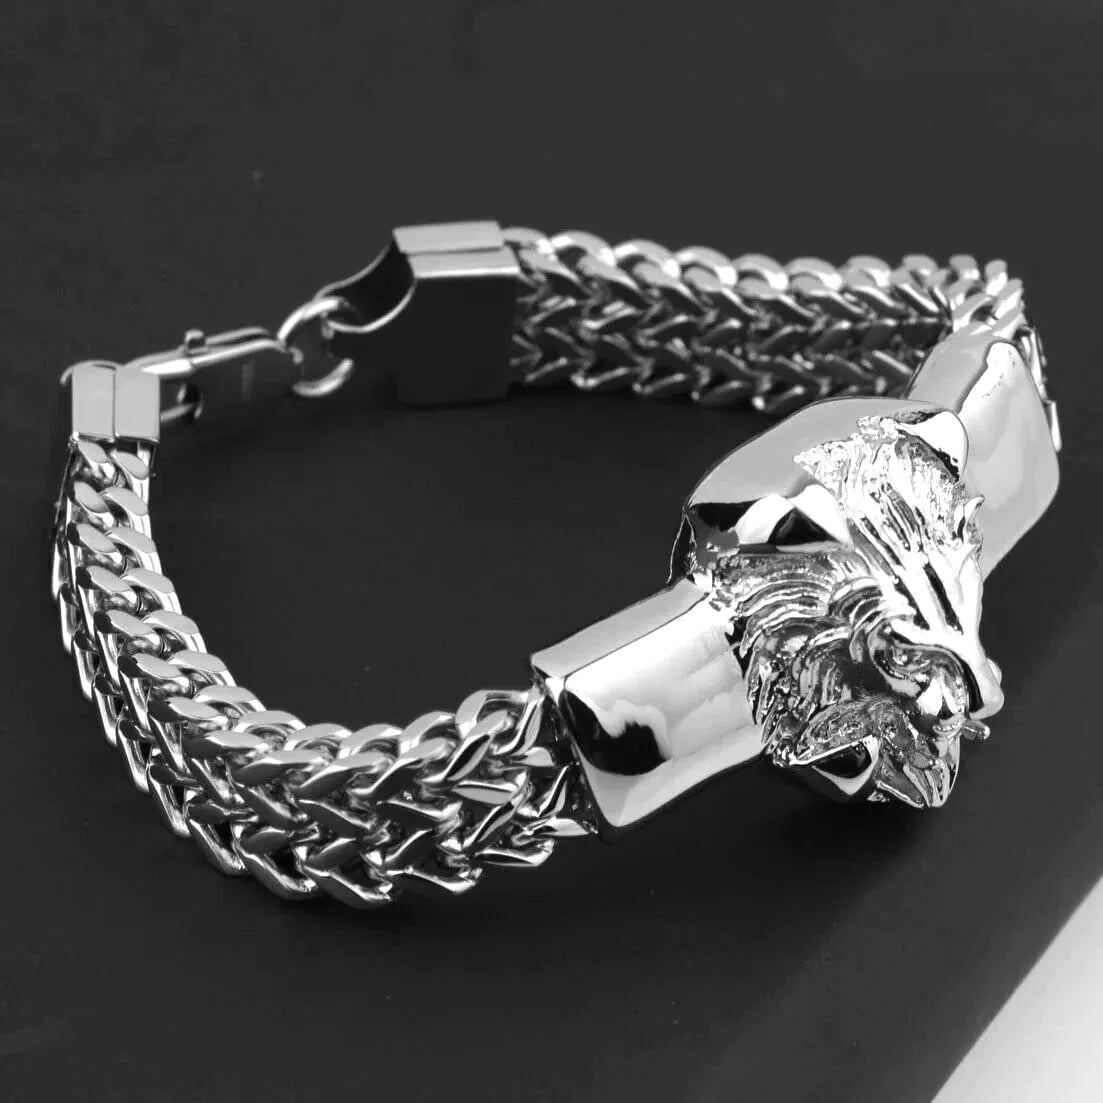 THE MEN THING Bracelet for Men - Heavy 12mm Double Franco Pure Stainless Steel Chain with Alloy Lion Head Bracelet for Men & Boys (10 inch)